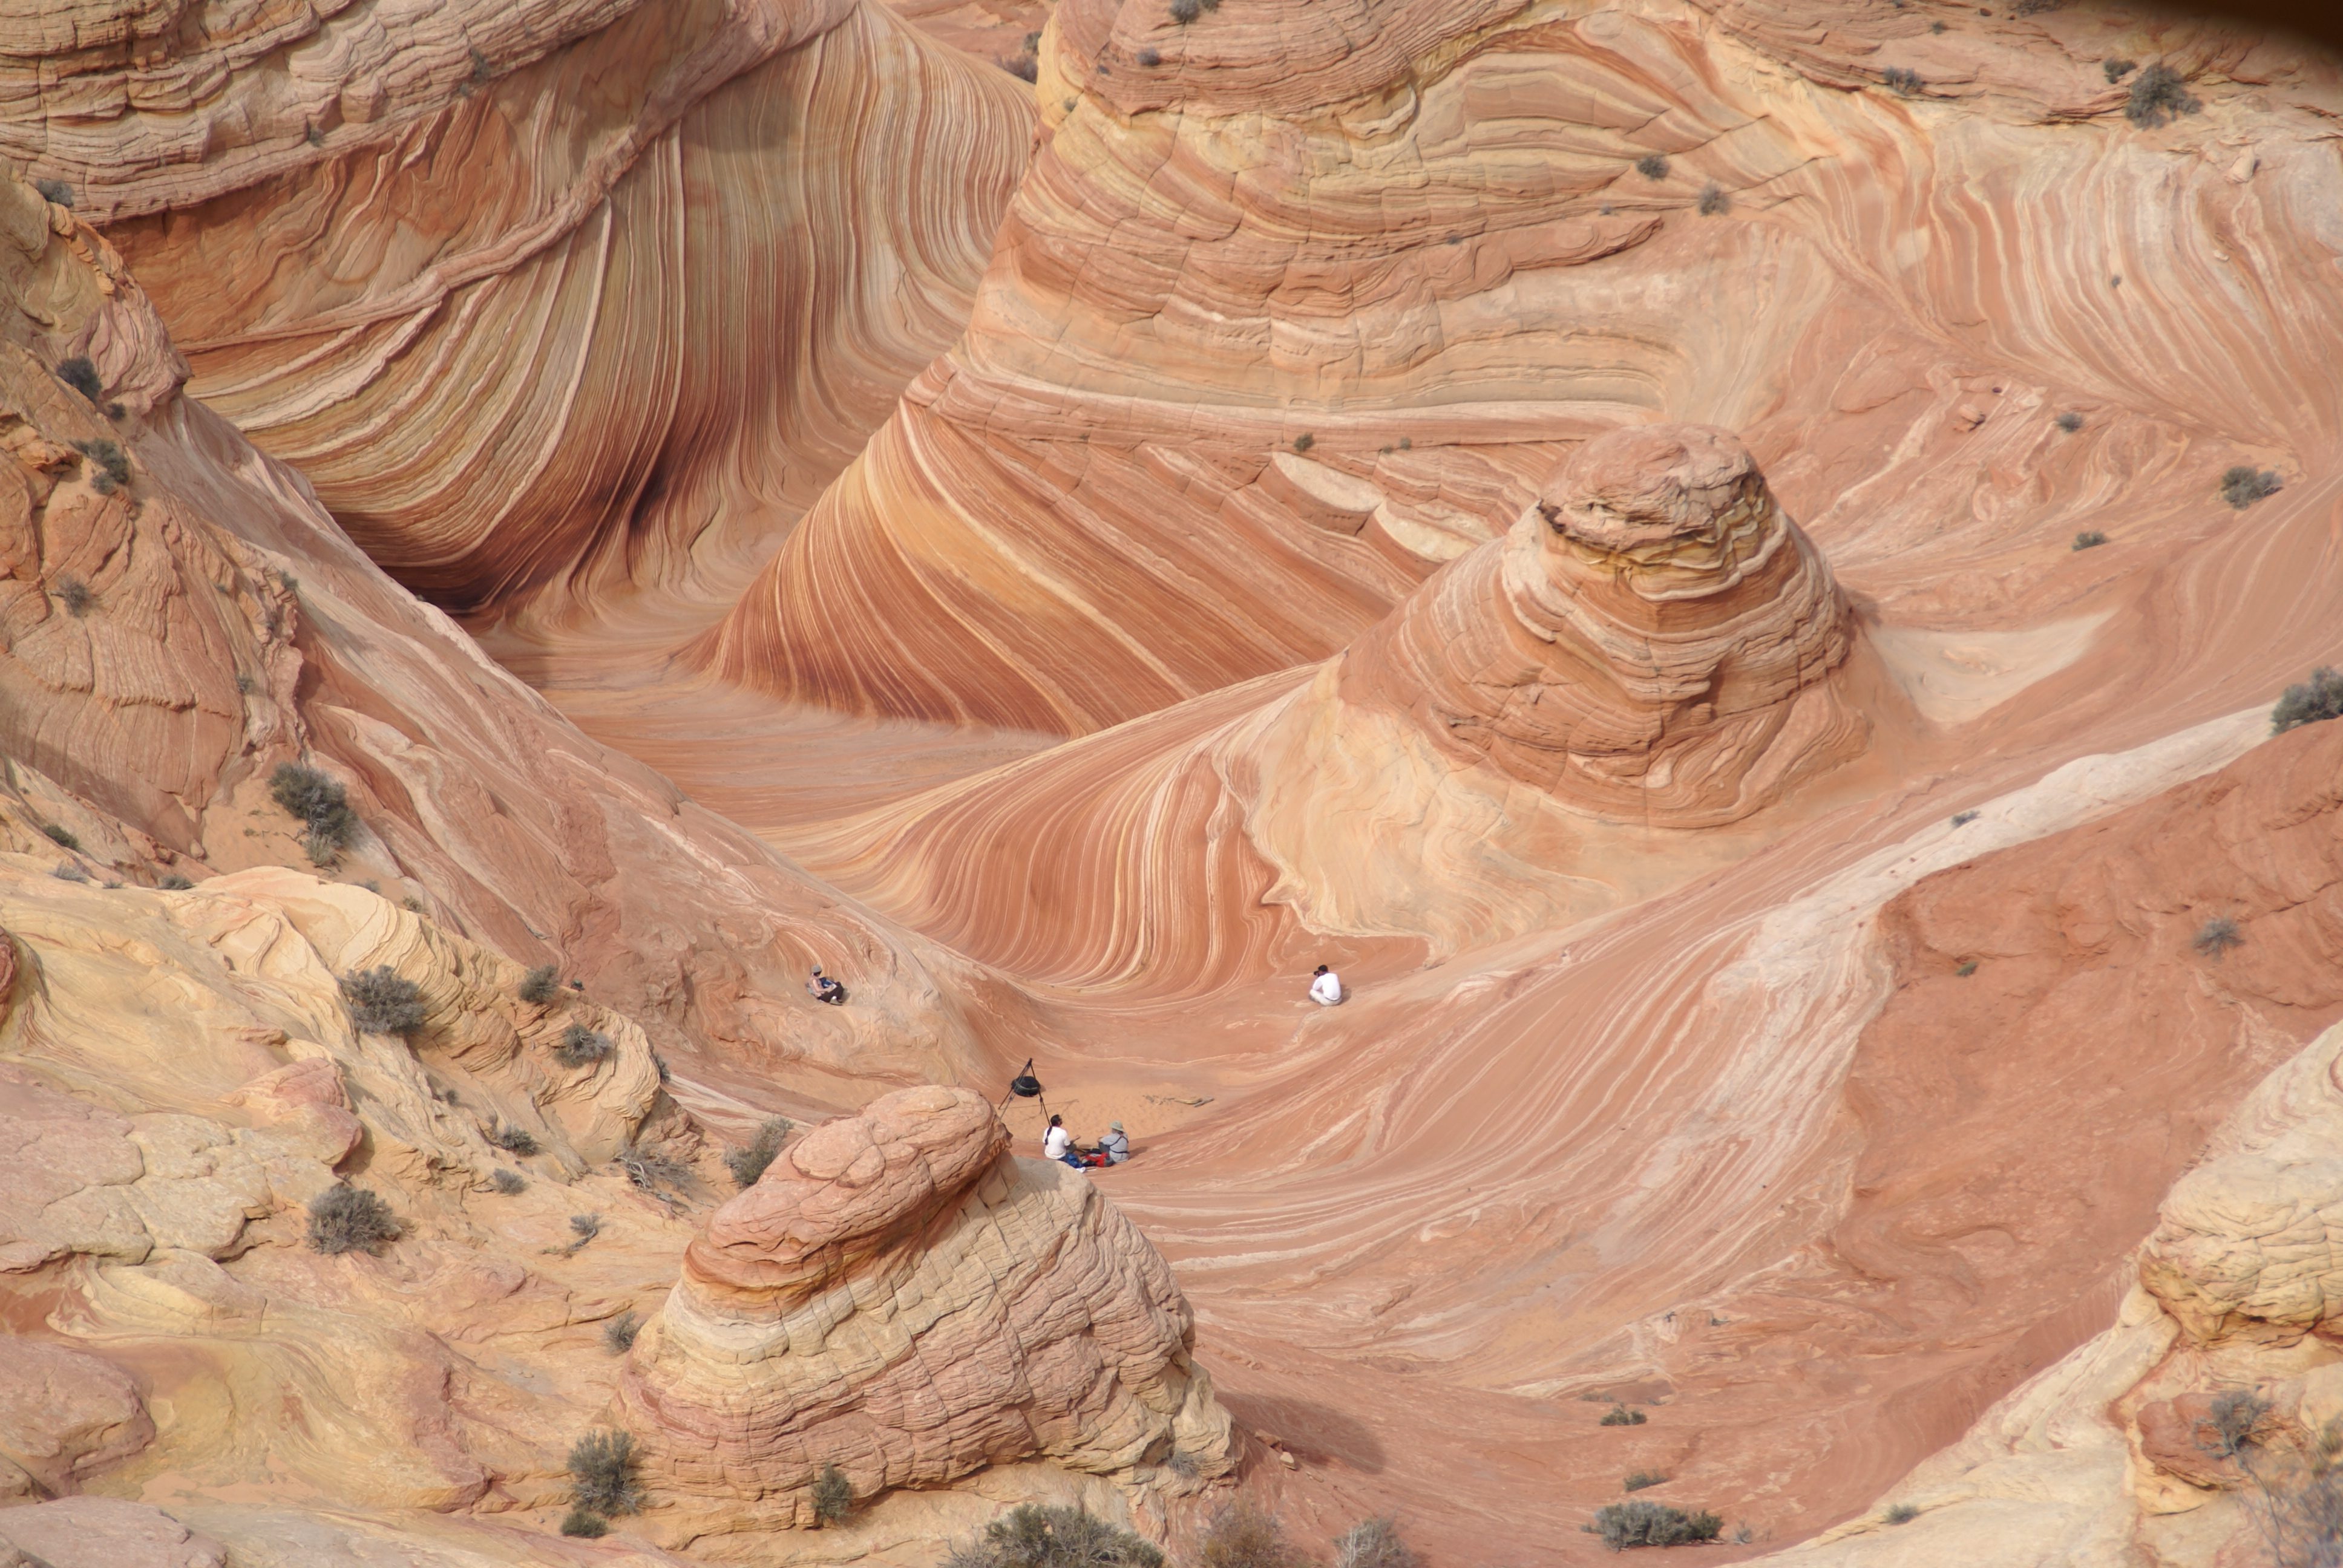 Coyote buttes permit areas are within a backcountry, undeveloped wilderness...